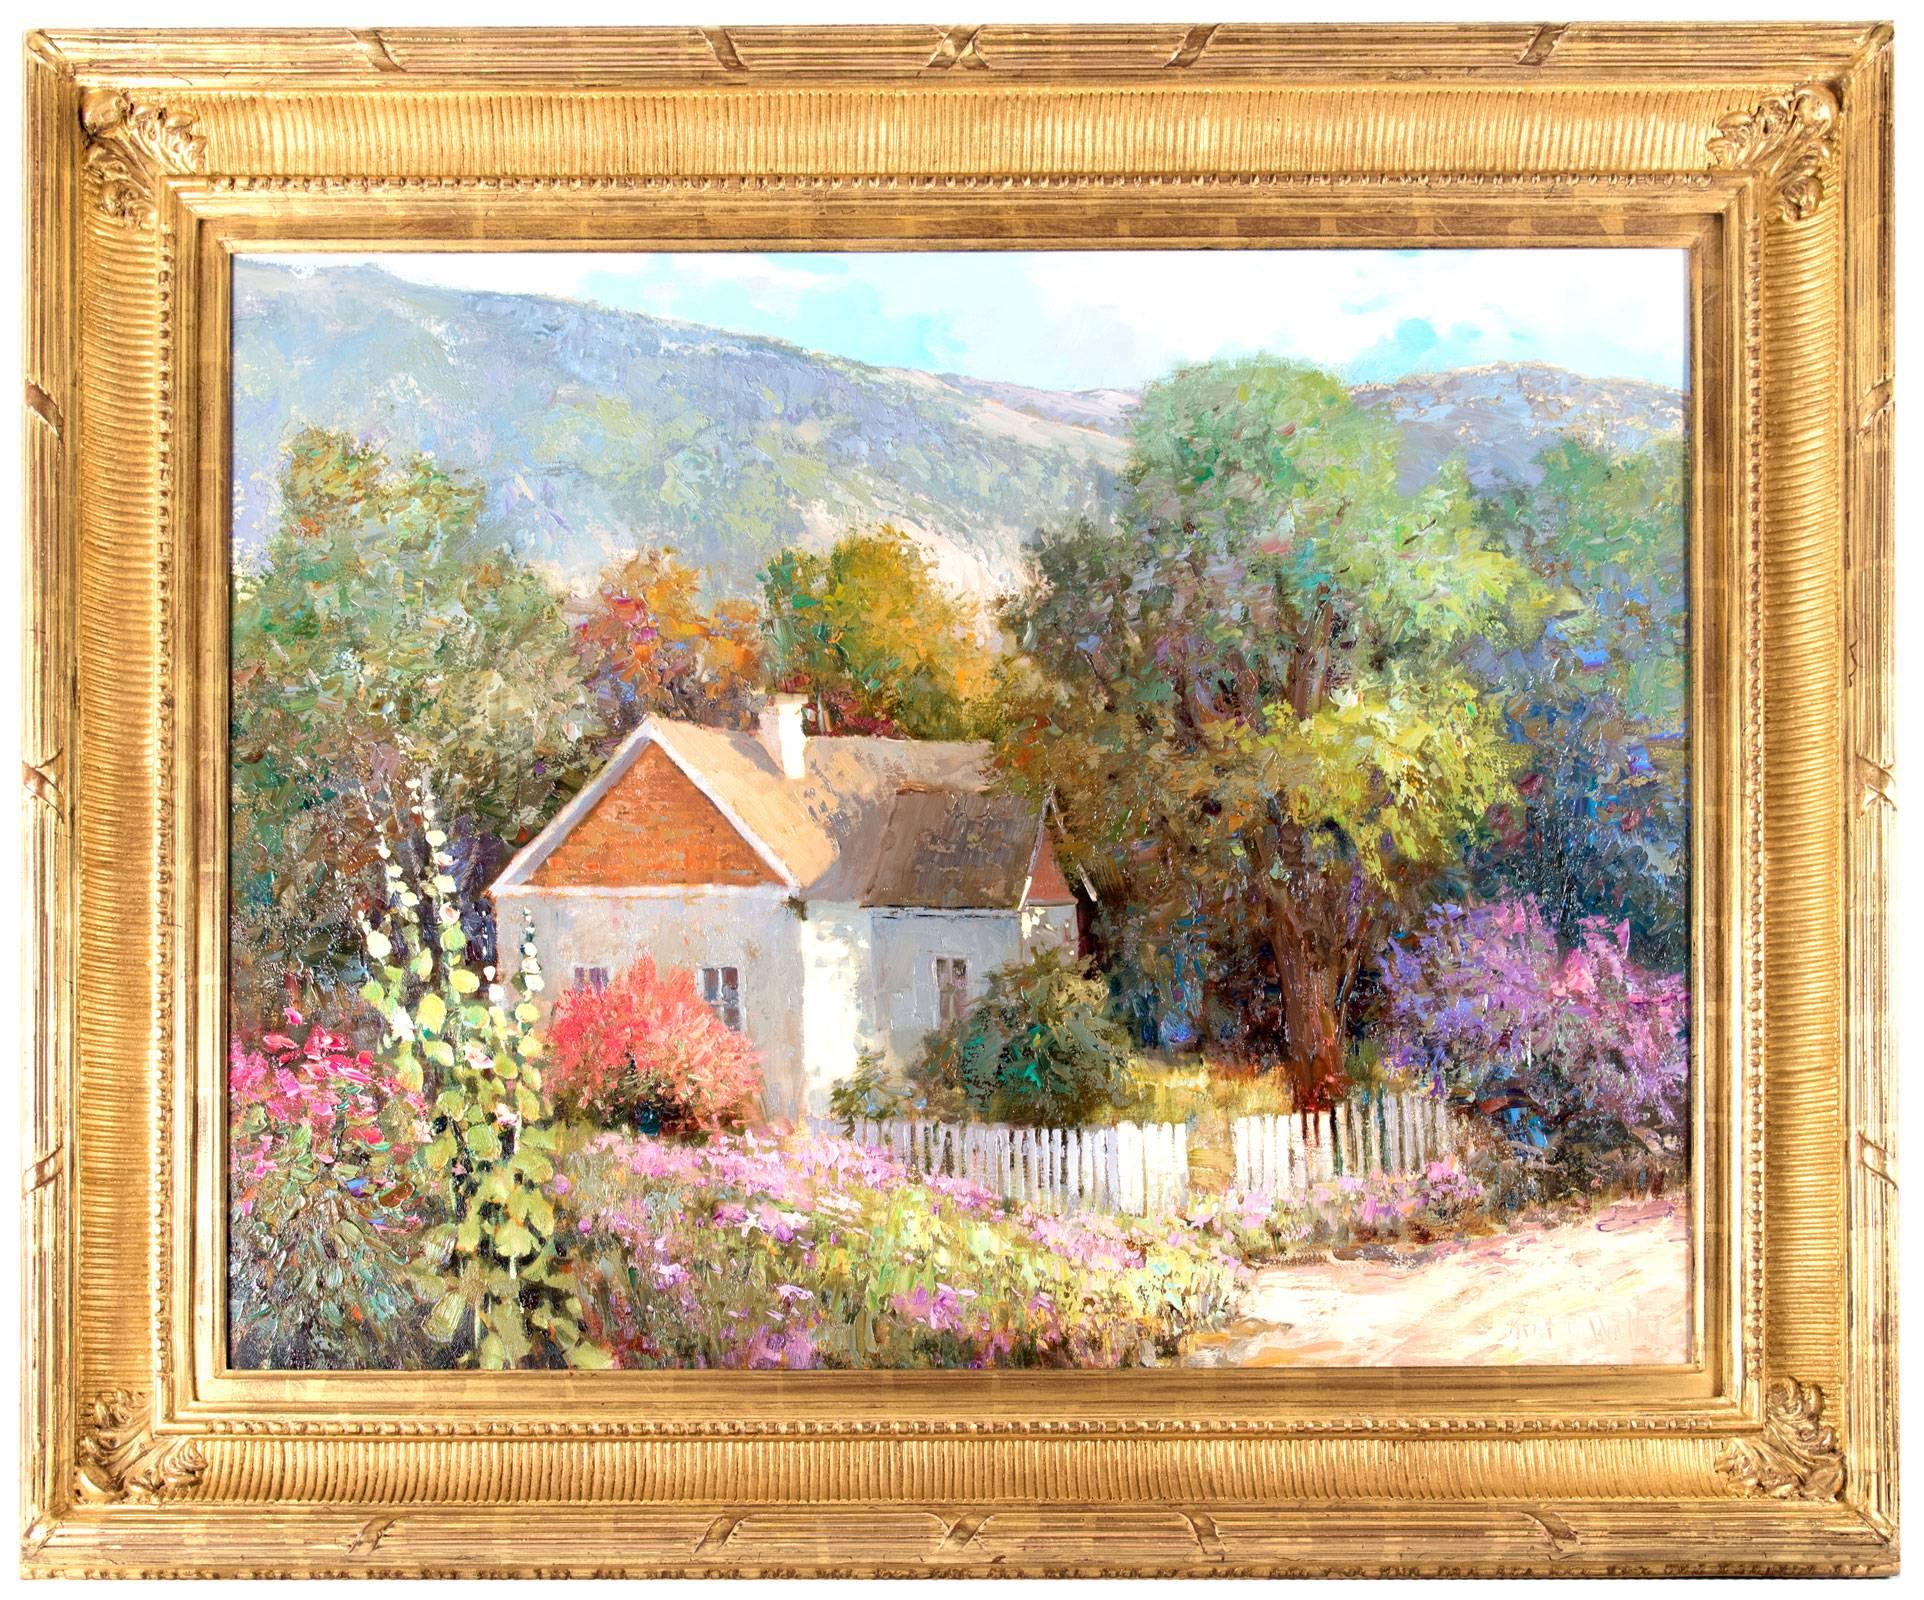 A quiet image of the countryside, evoking the fragrant memories of summer with dappled light and bright pops of colour. After earning Bachelors and Masters degrees from Utah State University in Business Administration, Wallis was seeking to feed his